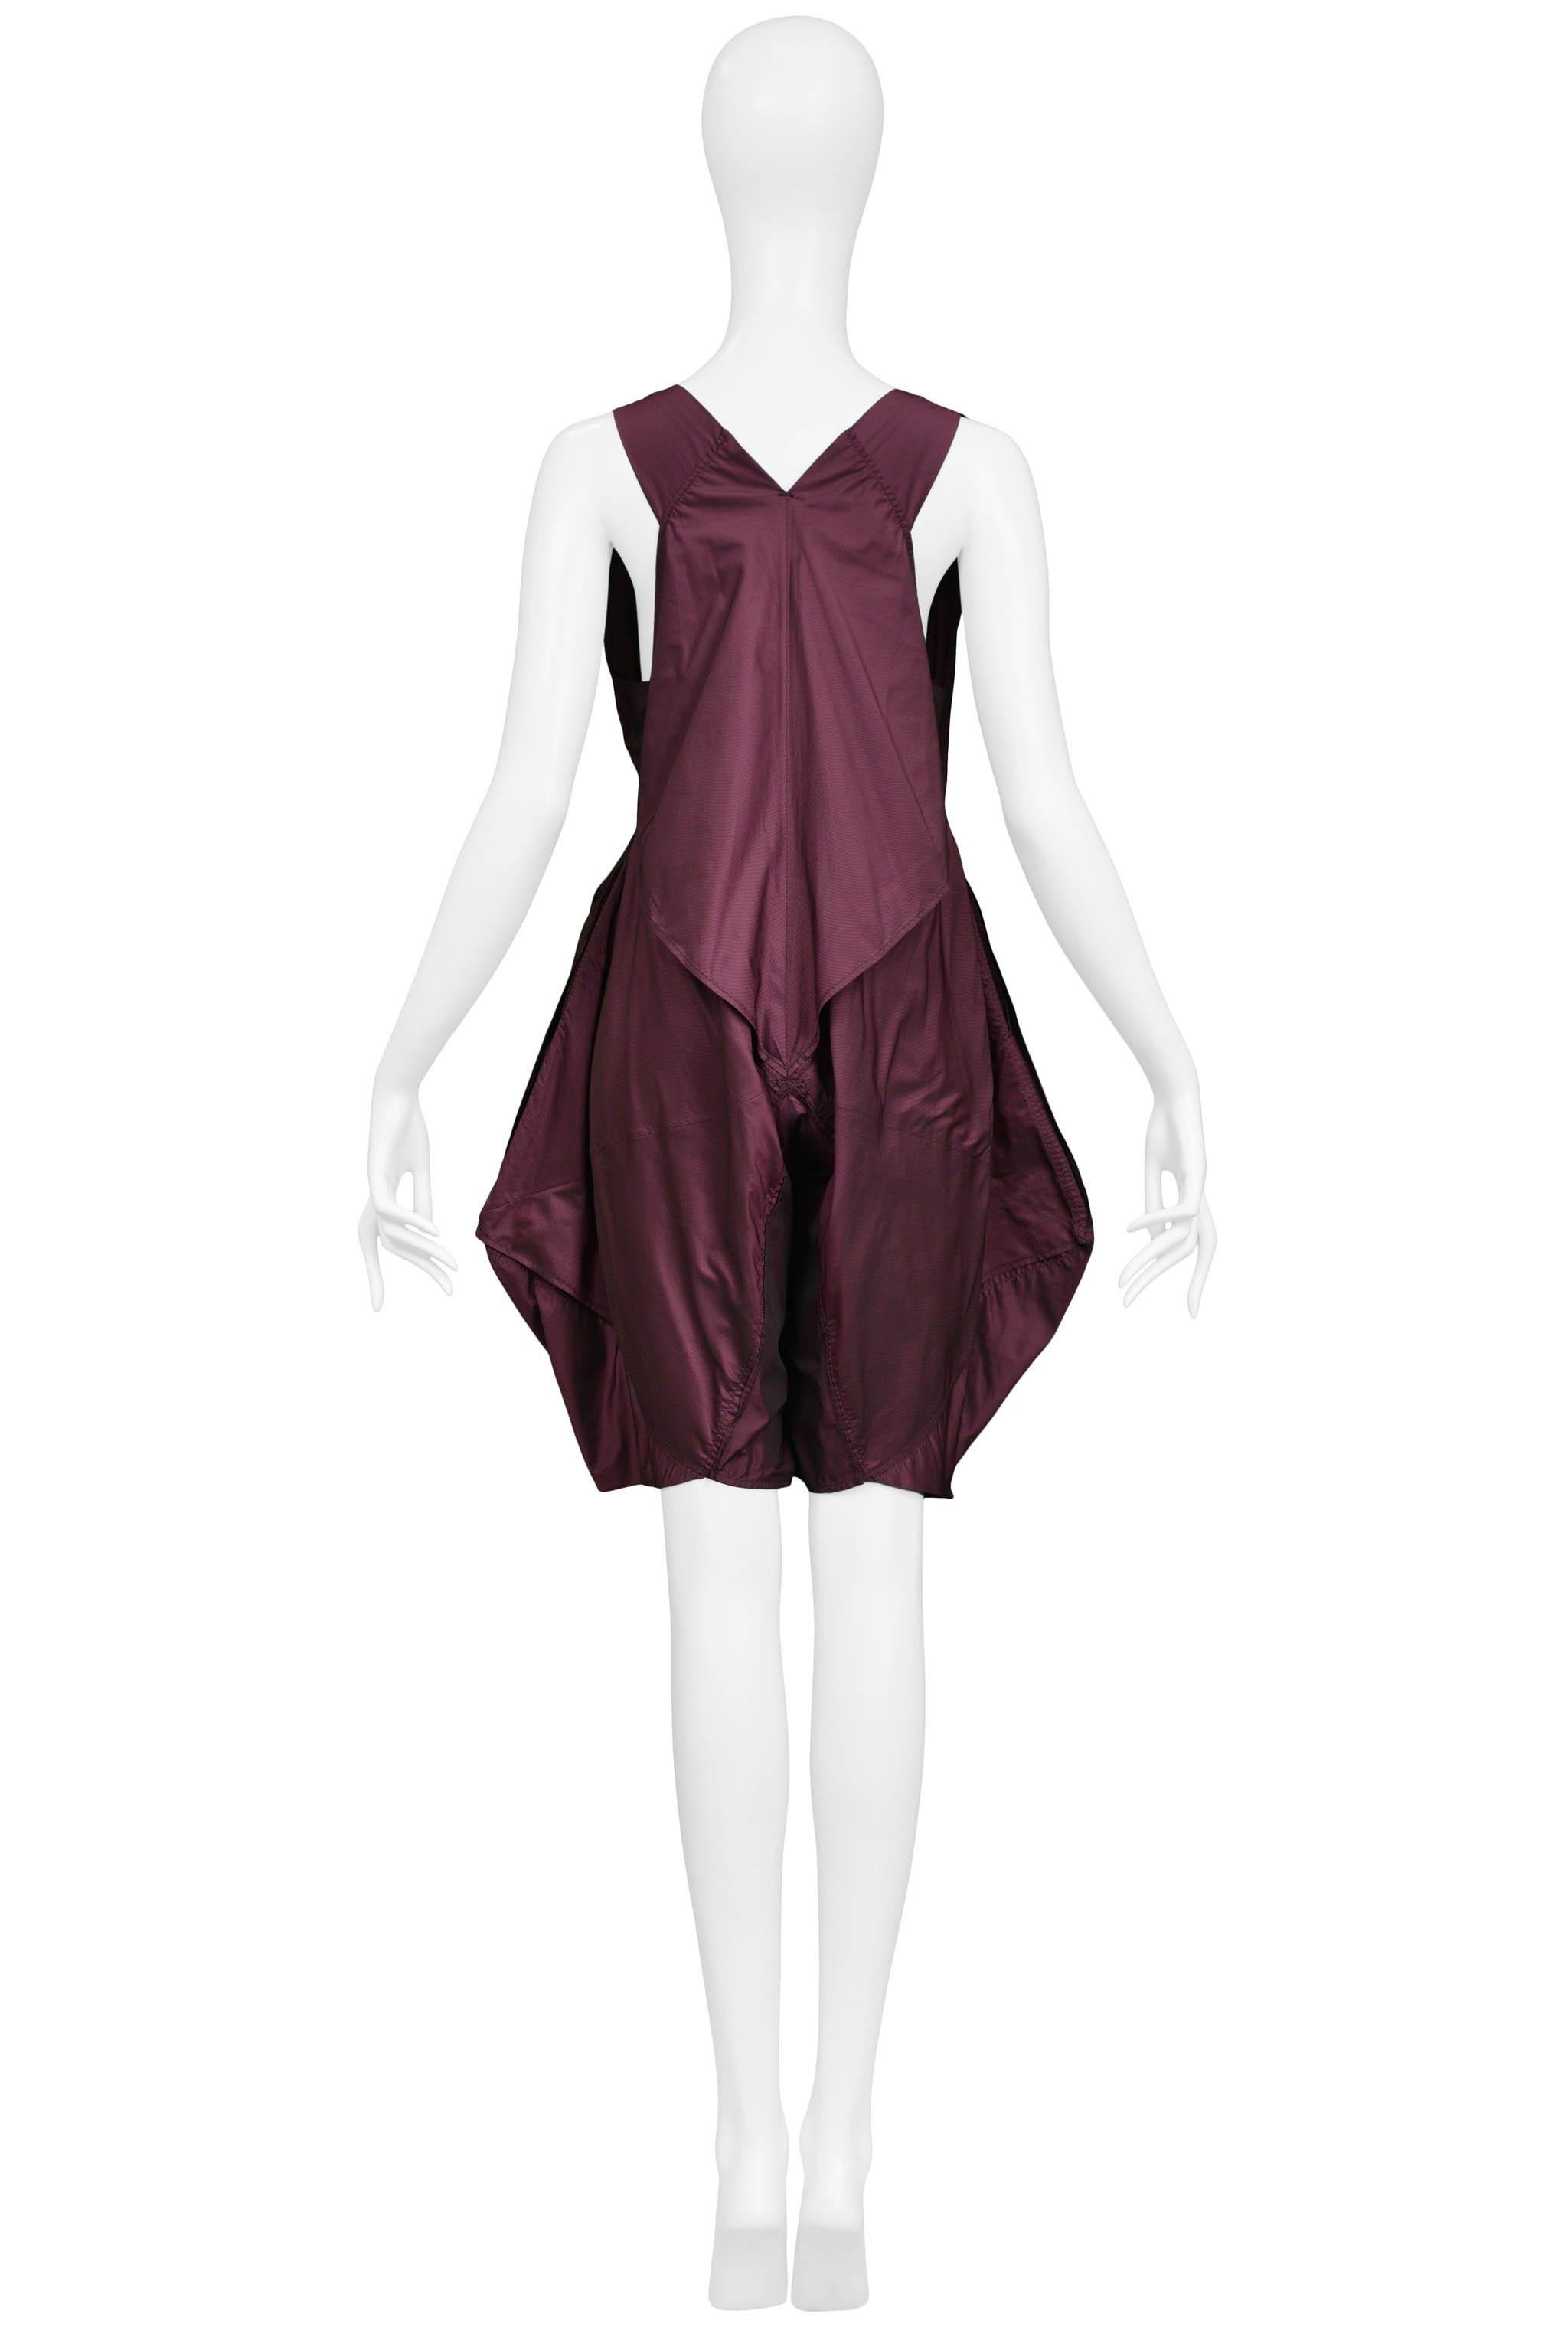 Issey Miyake Purple Avant Garde Balloon Romper In Excellent Condition For Sale In Los Angeles, CA